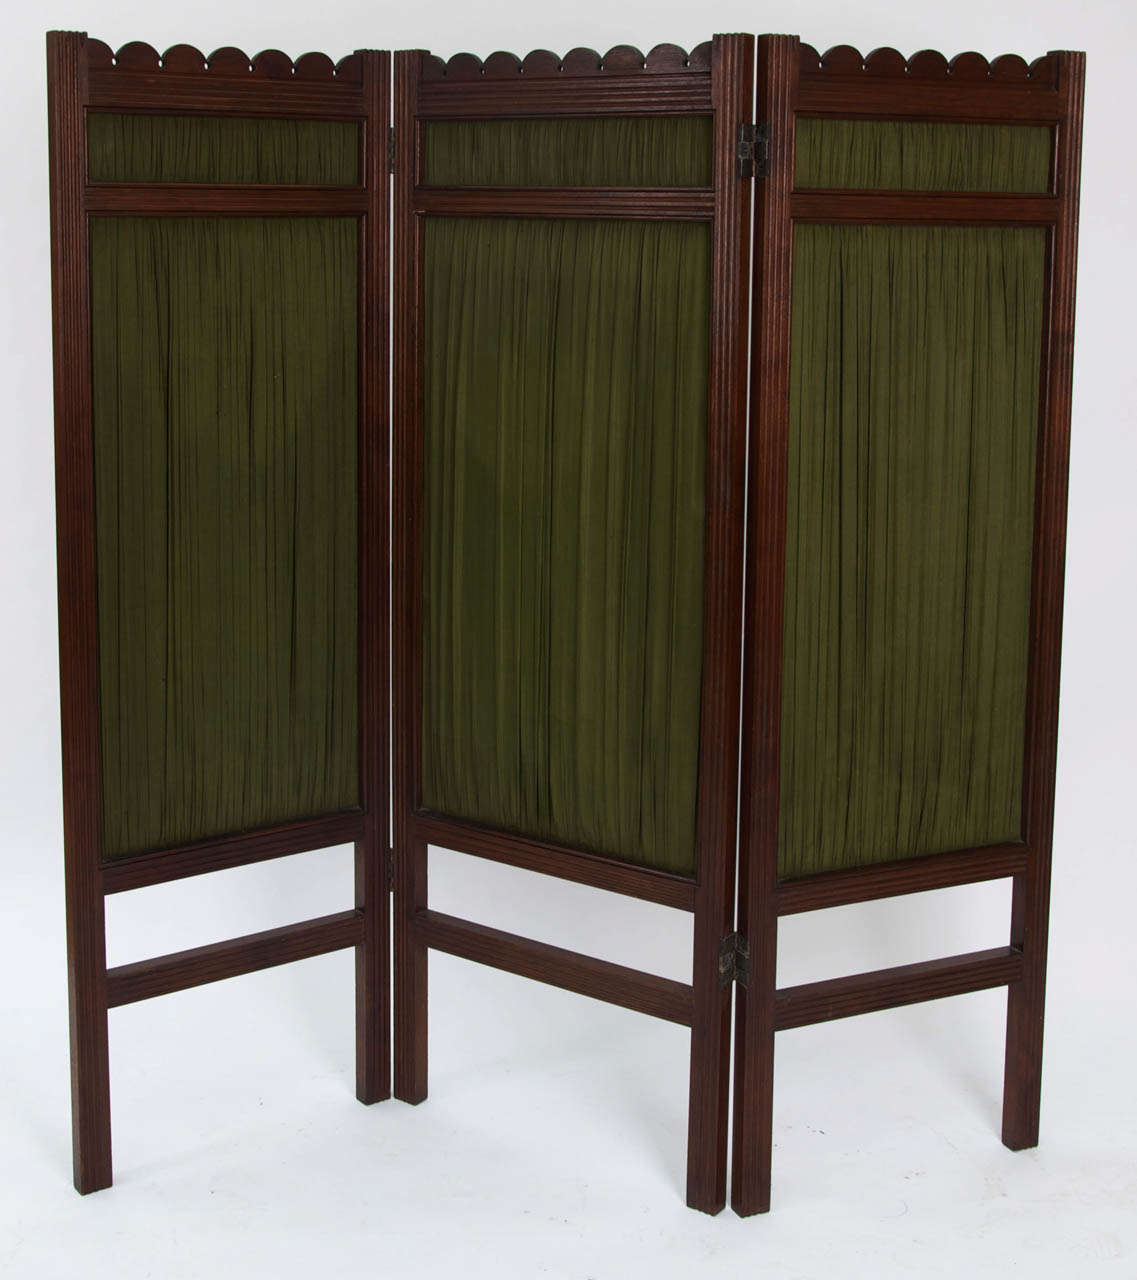 English Arts & Crafts 3 Fold Walnut and Copper Screen by Keswick School of Industrial Arts circa 1900 For Sale 2